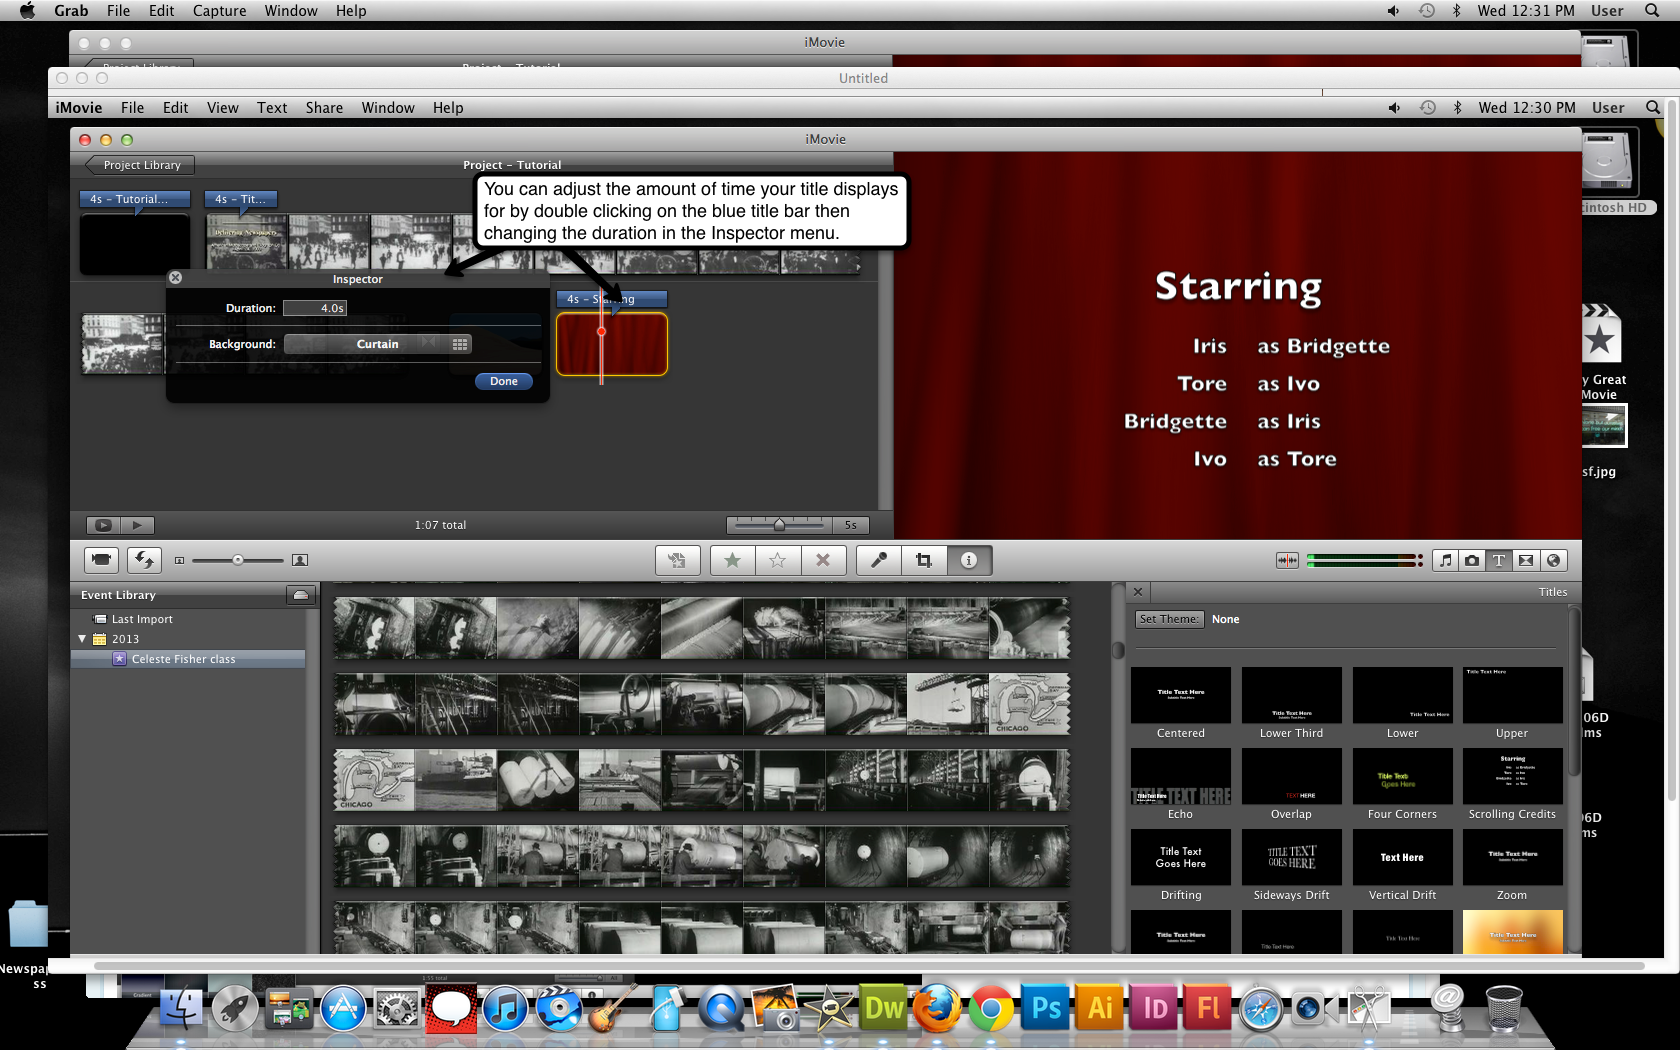 Visual guide to adding titles in iMovie '11